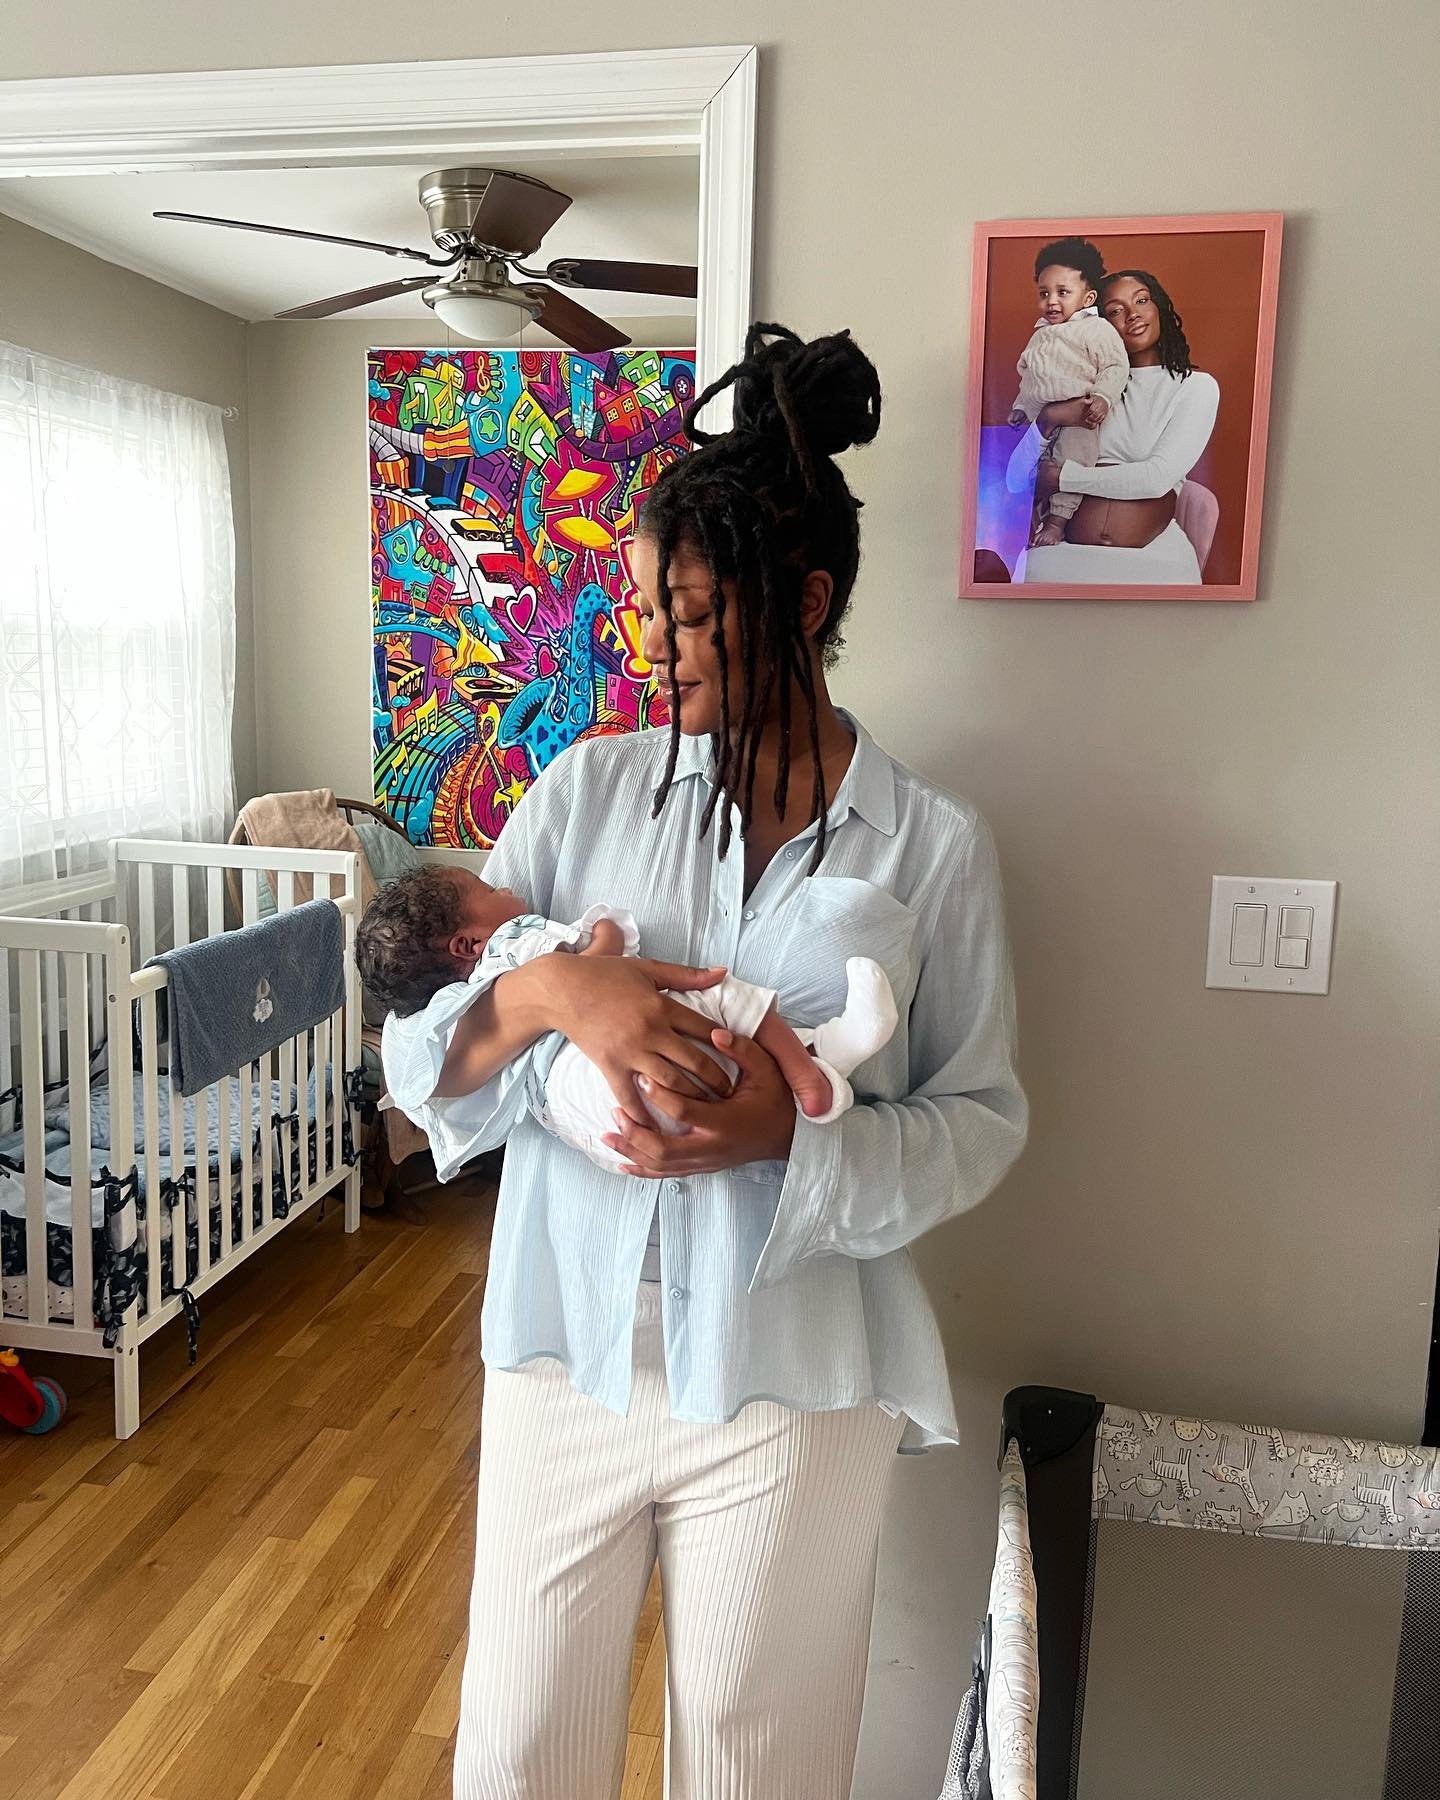 &ldquo;For me, birthing a child, a book, or a dance is part of the same cycle of creativity. The &lsquo;births&rsquo; are the culmination of a period of growth and the expression of the life force.&rdquo; &mdash; @queenafua 

Sharing this postpartum 